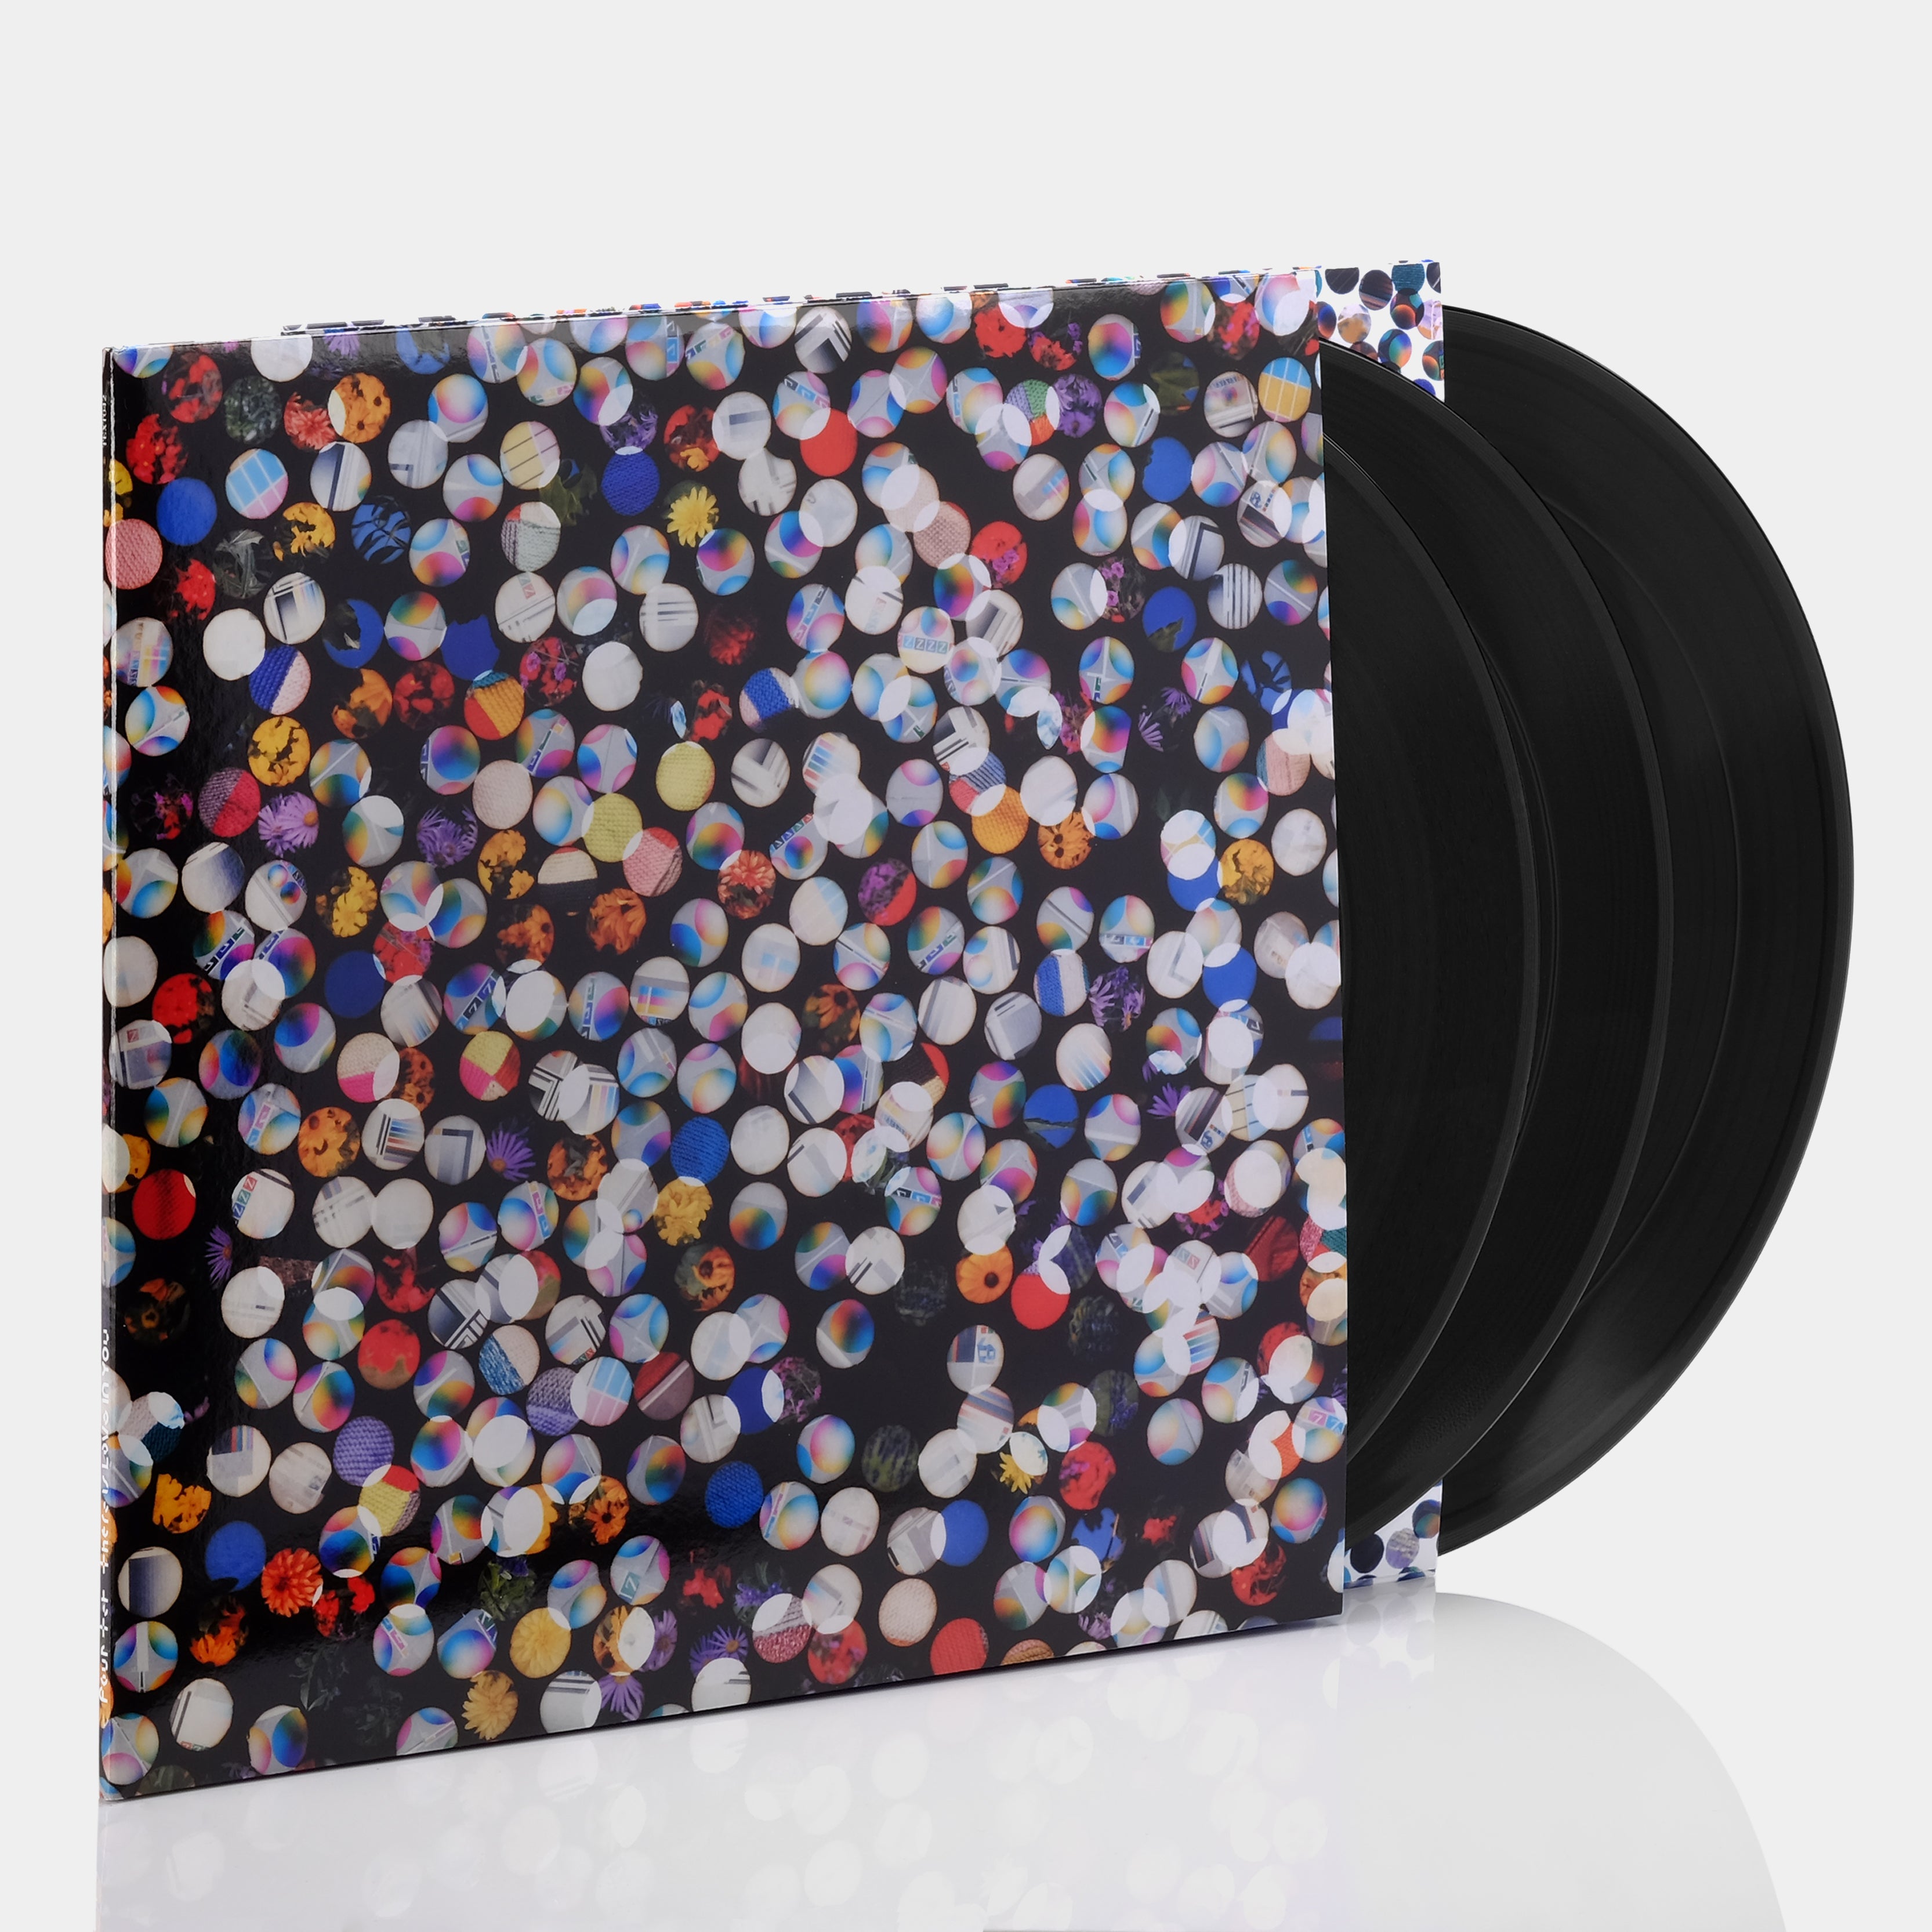 Four Tet - There Is Love In You (Expanded Edition) 3xLP Vinyl Record